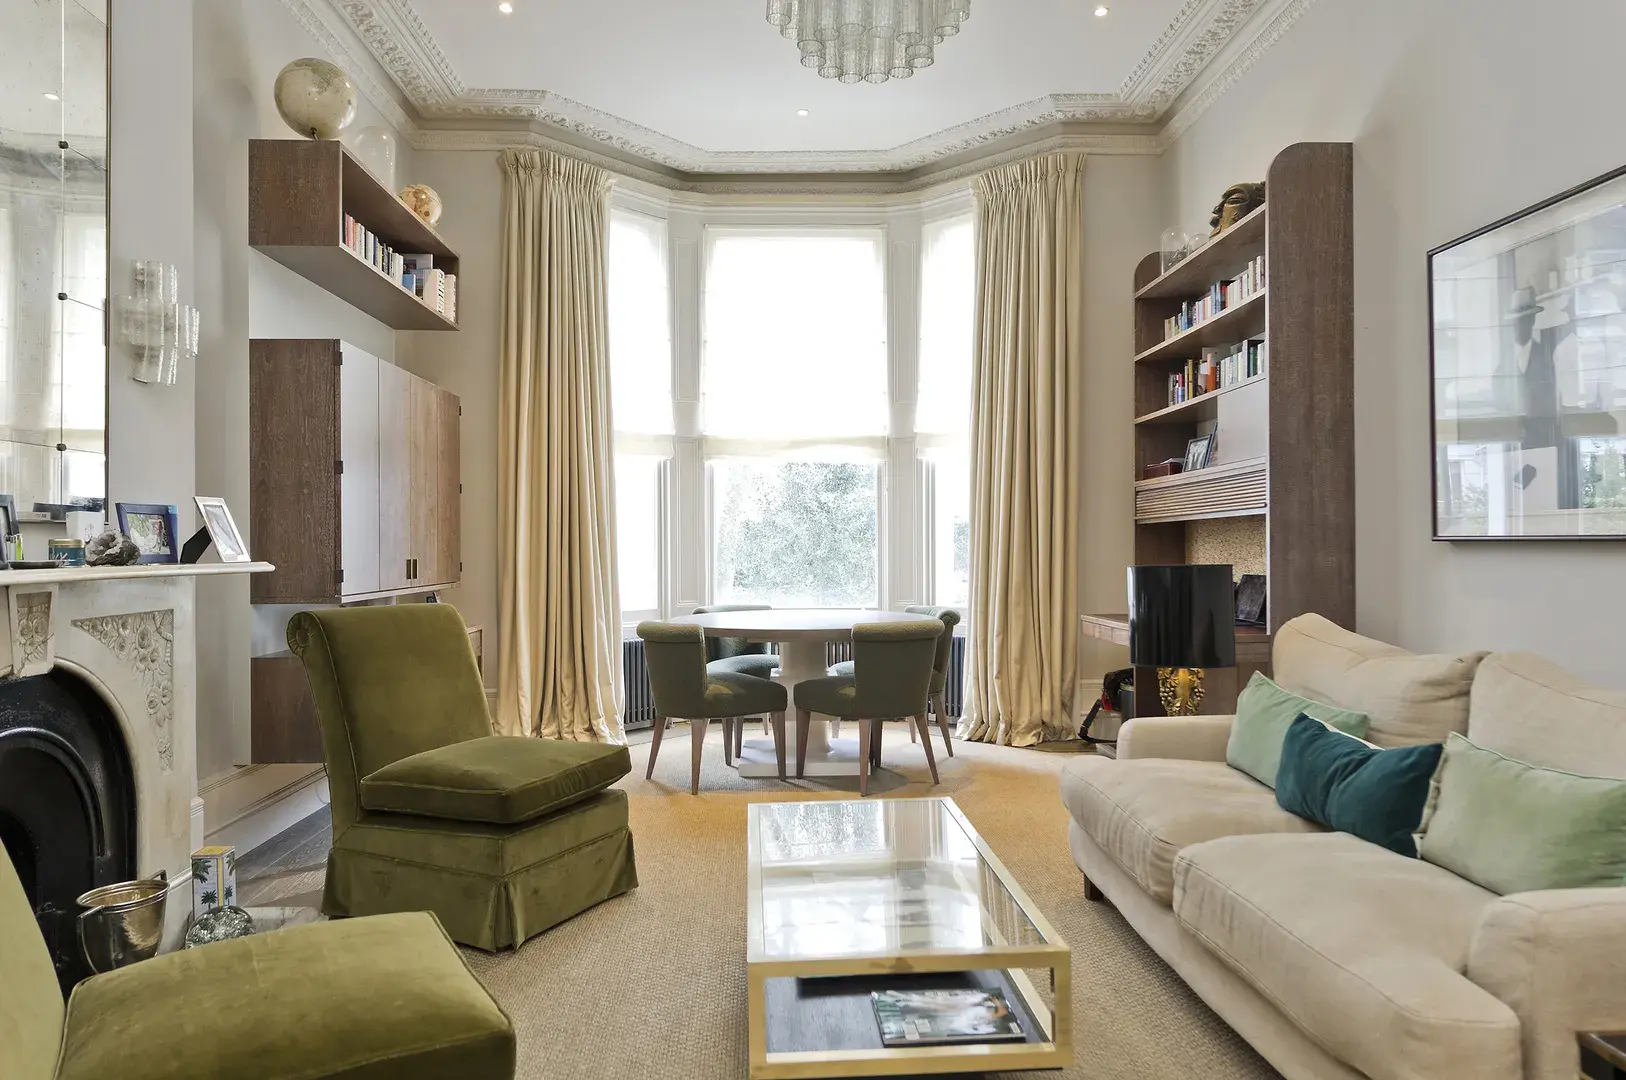 Bassett Road, holiday home in Notting Hill, London